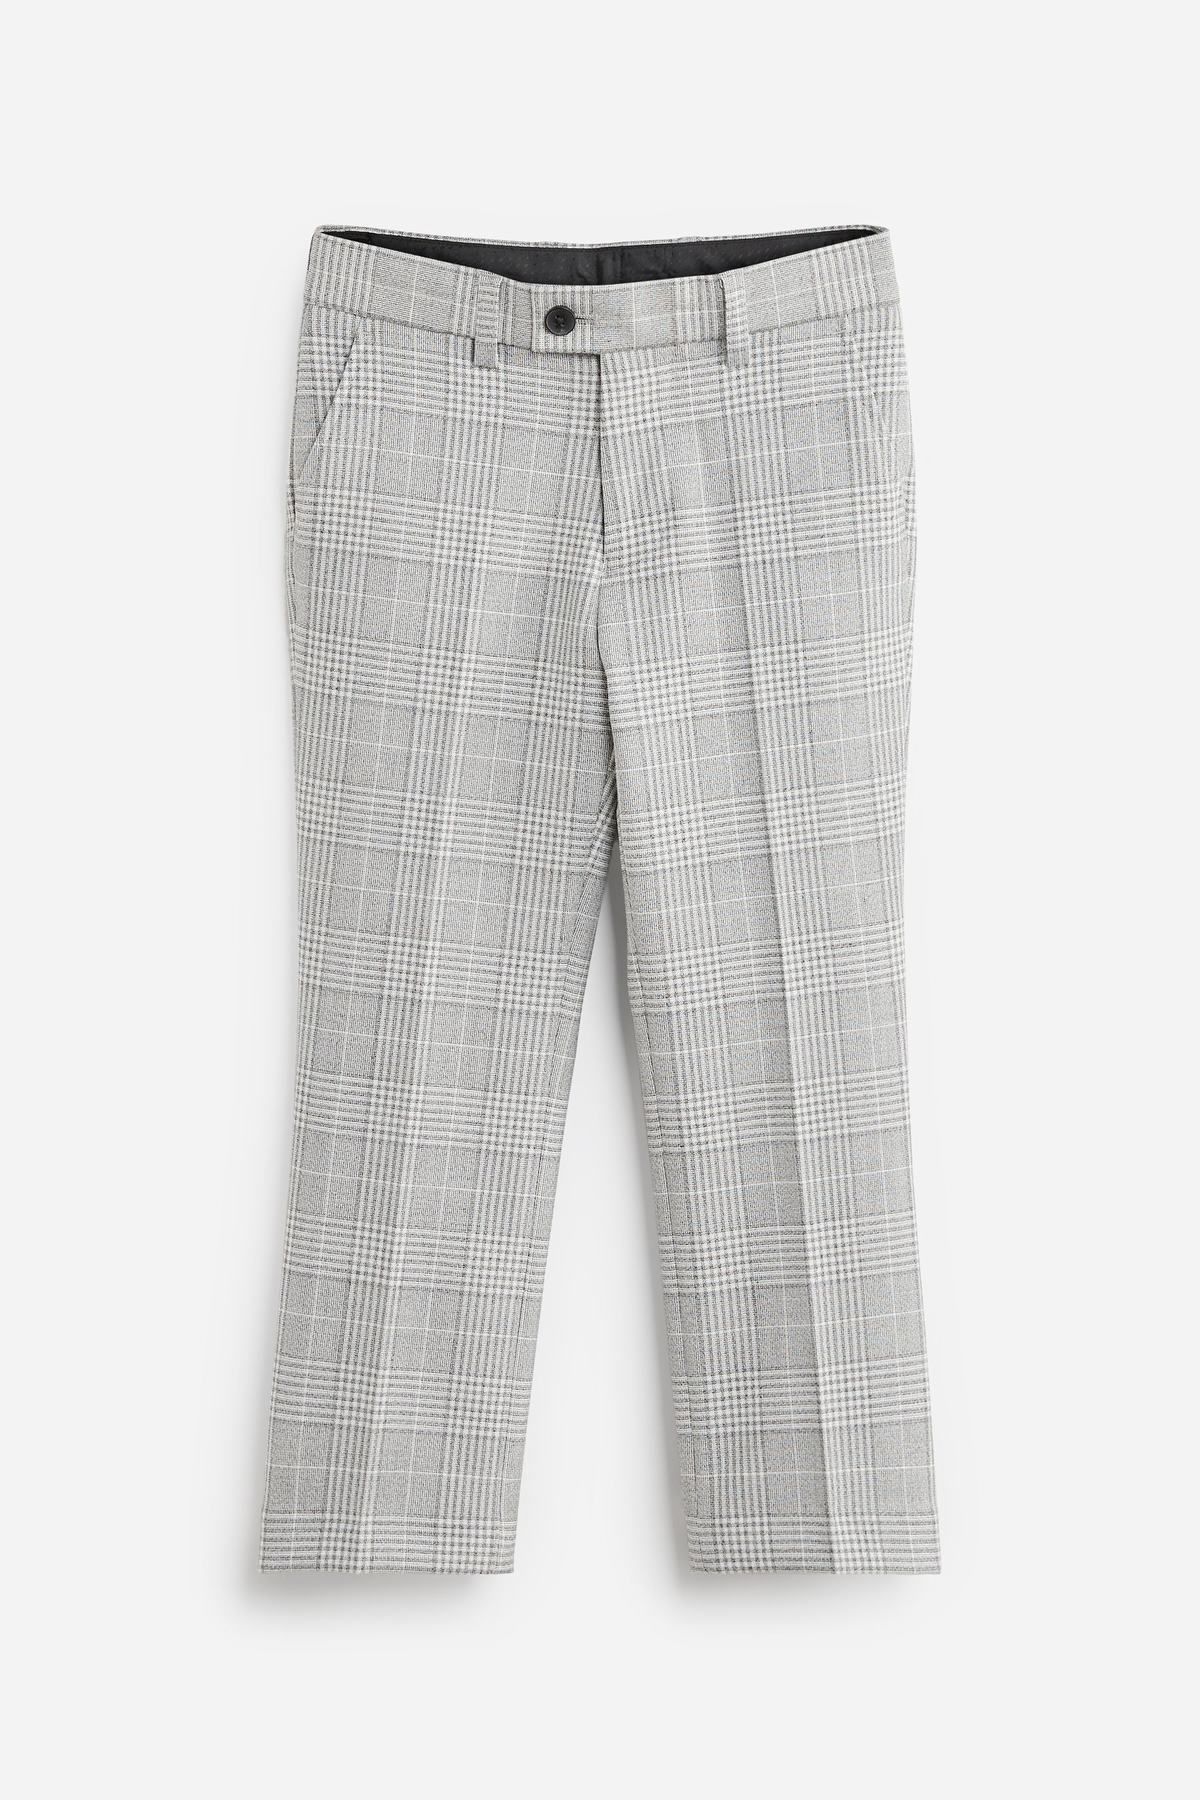 Dobell Navy Shadow Check Suit Trousers | Dobell